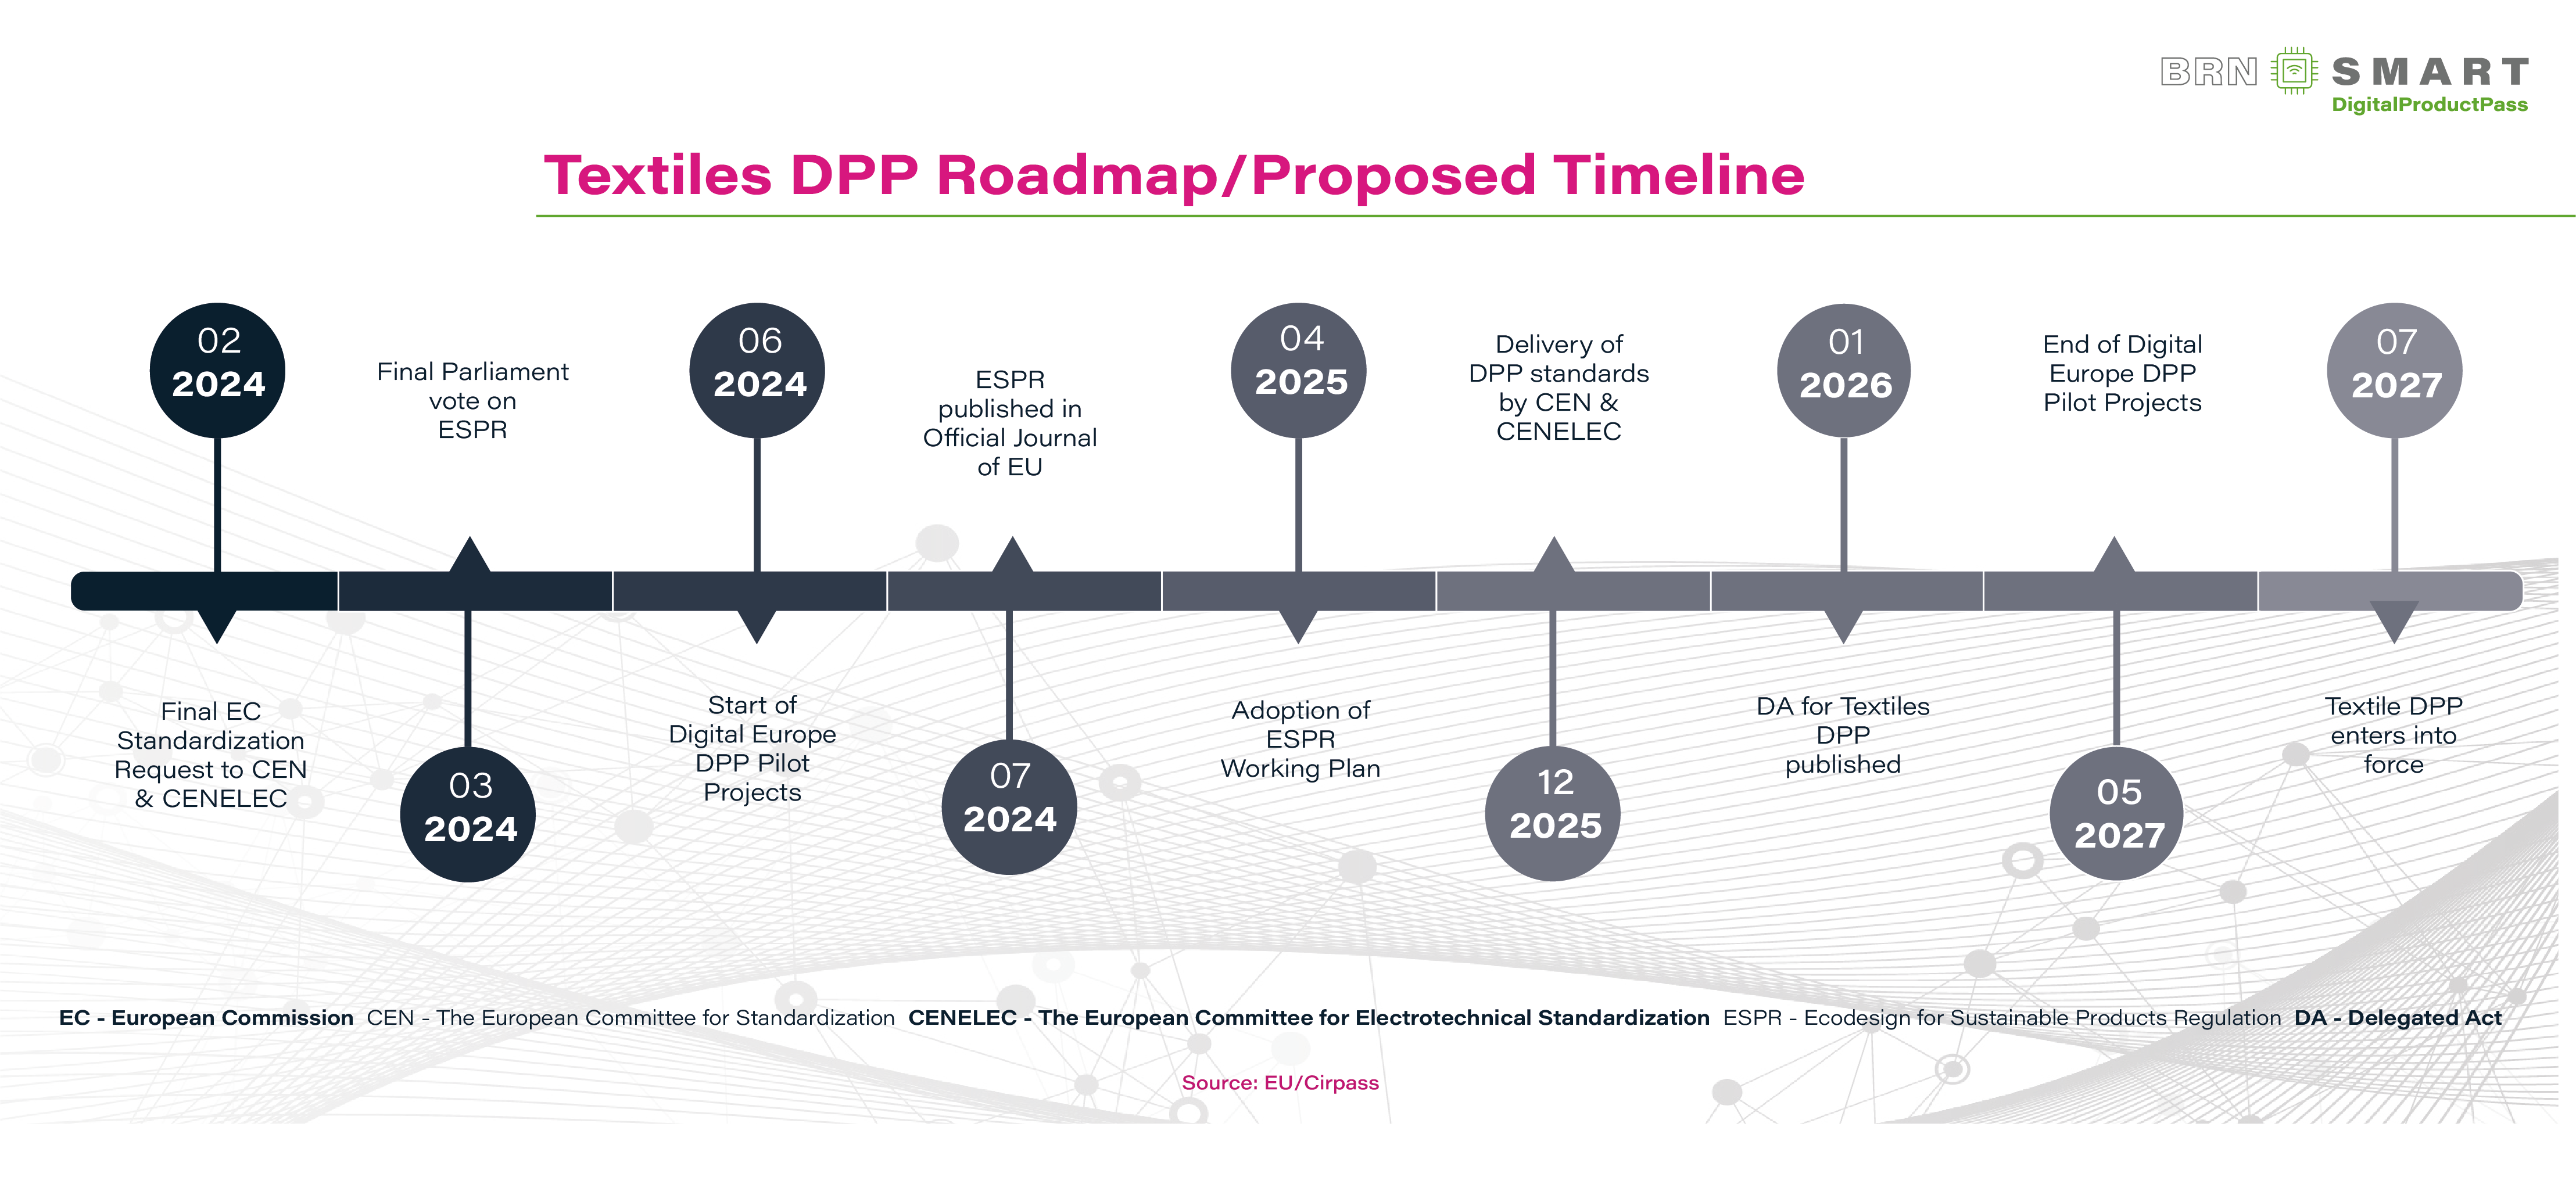 Proposed Timeline for Digital Product Passes in the EU